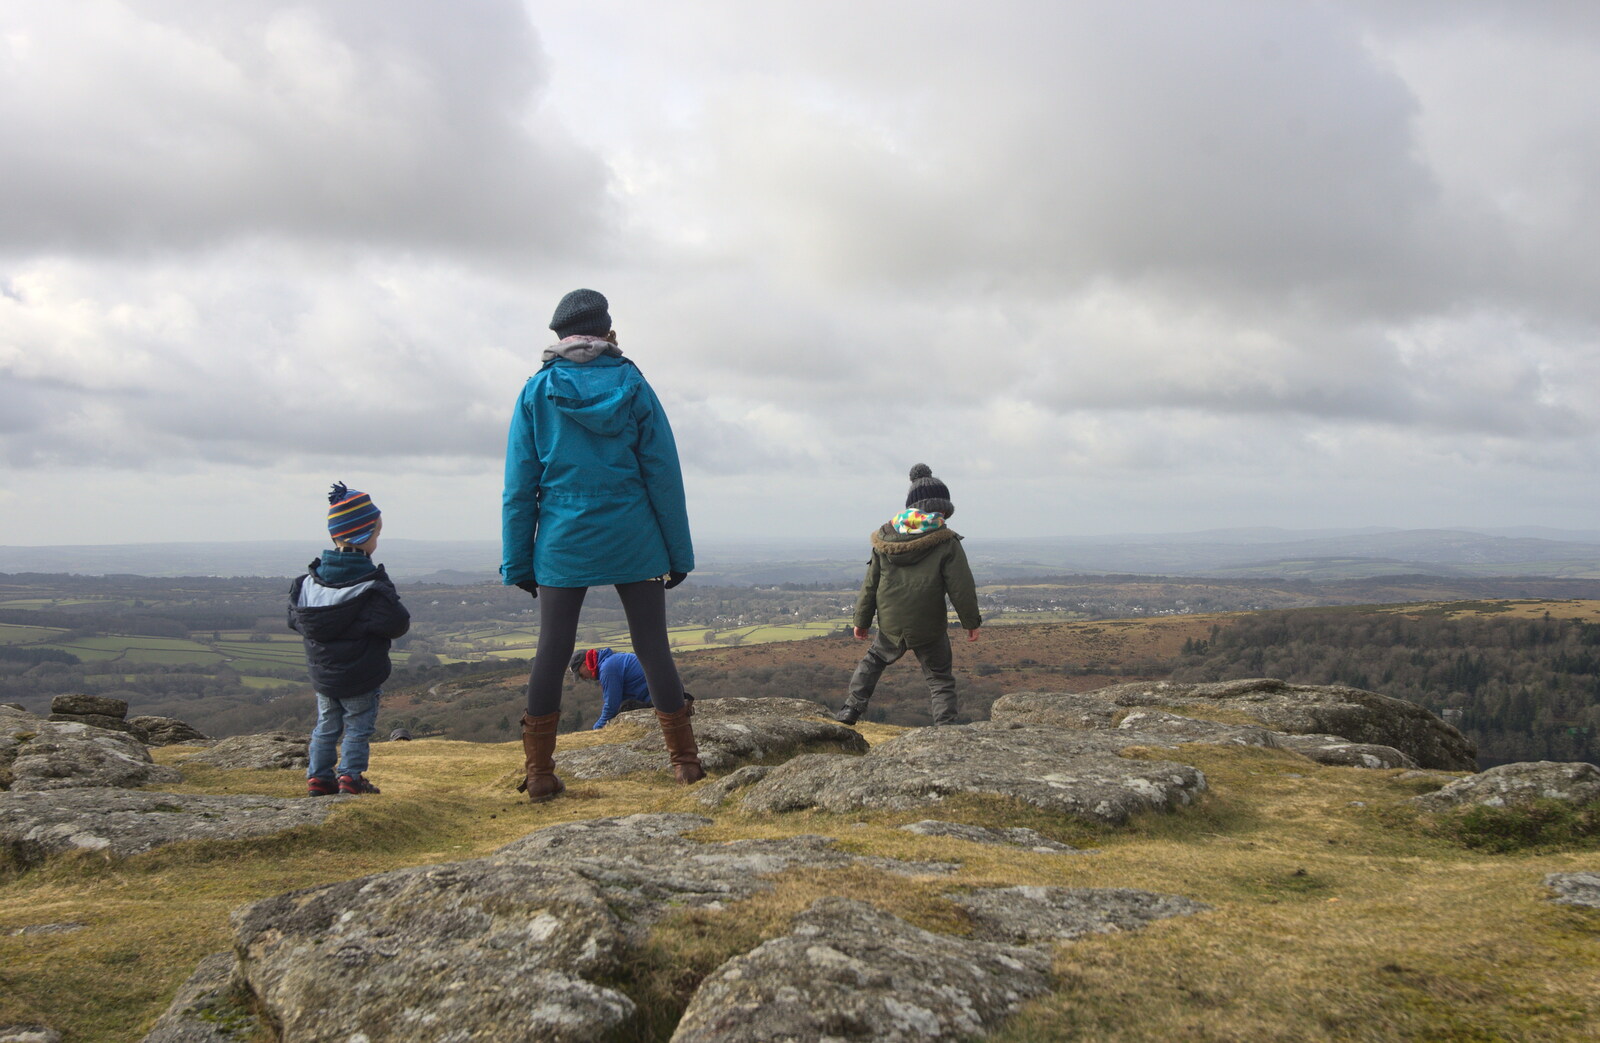 Standing on the roof of Dartmoor from A Trip to Grandma J's, Spreyton, Devon - 18th February 2015